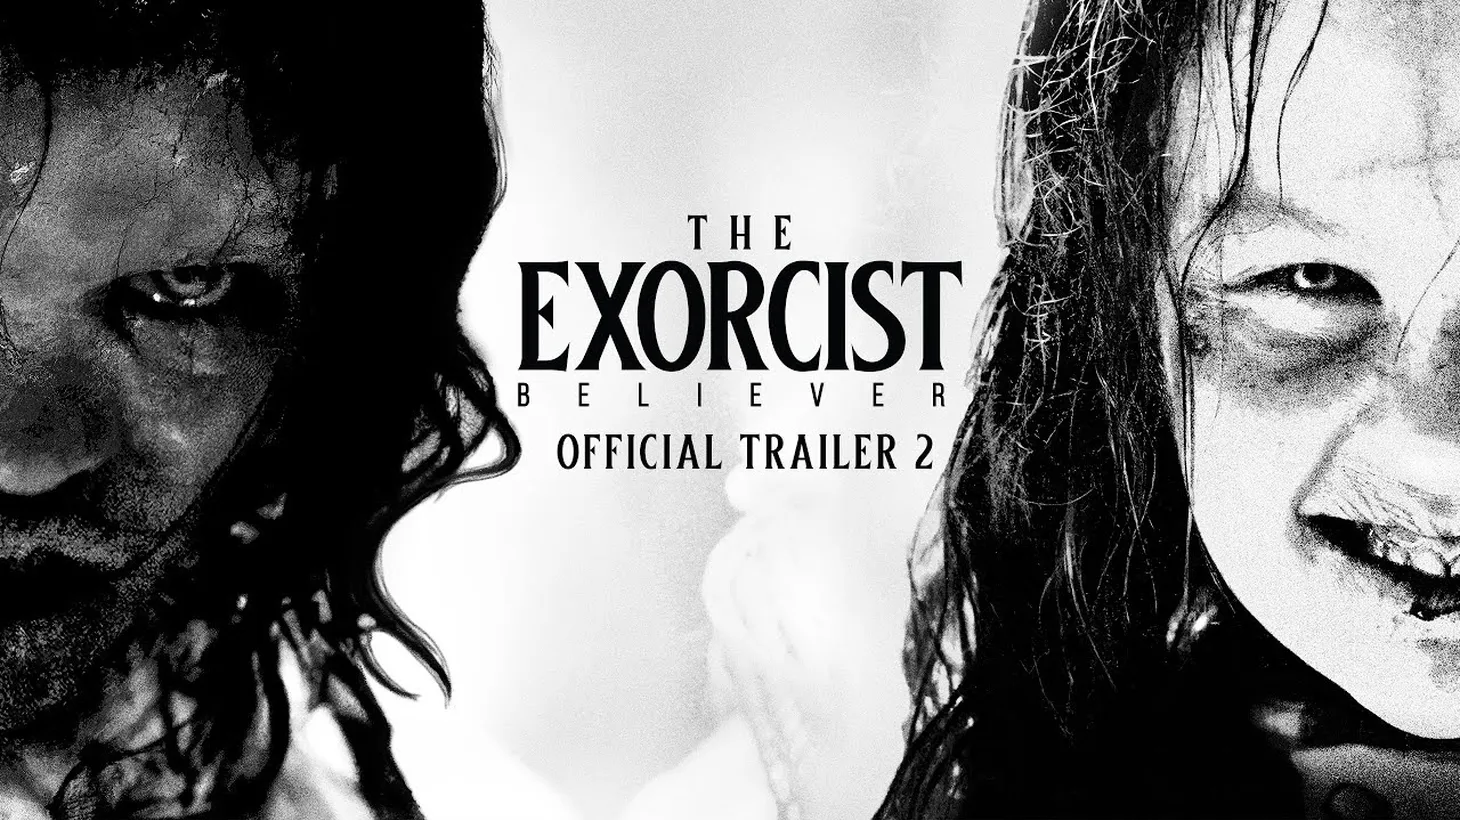 In time for Halloween, Universal Pictures releases its latest installment of The Exorcist franchise.